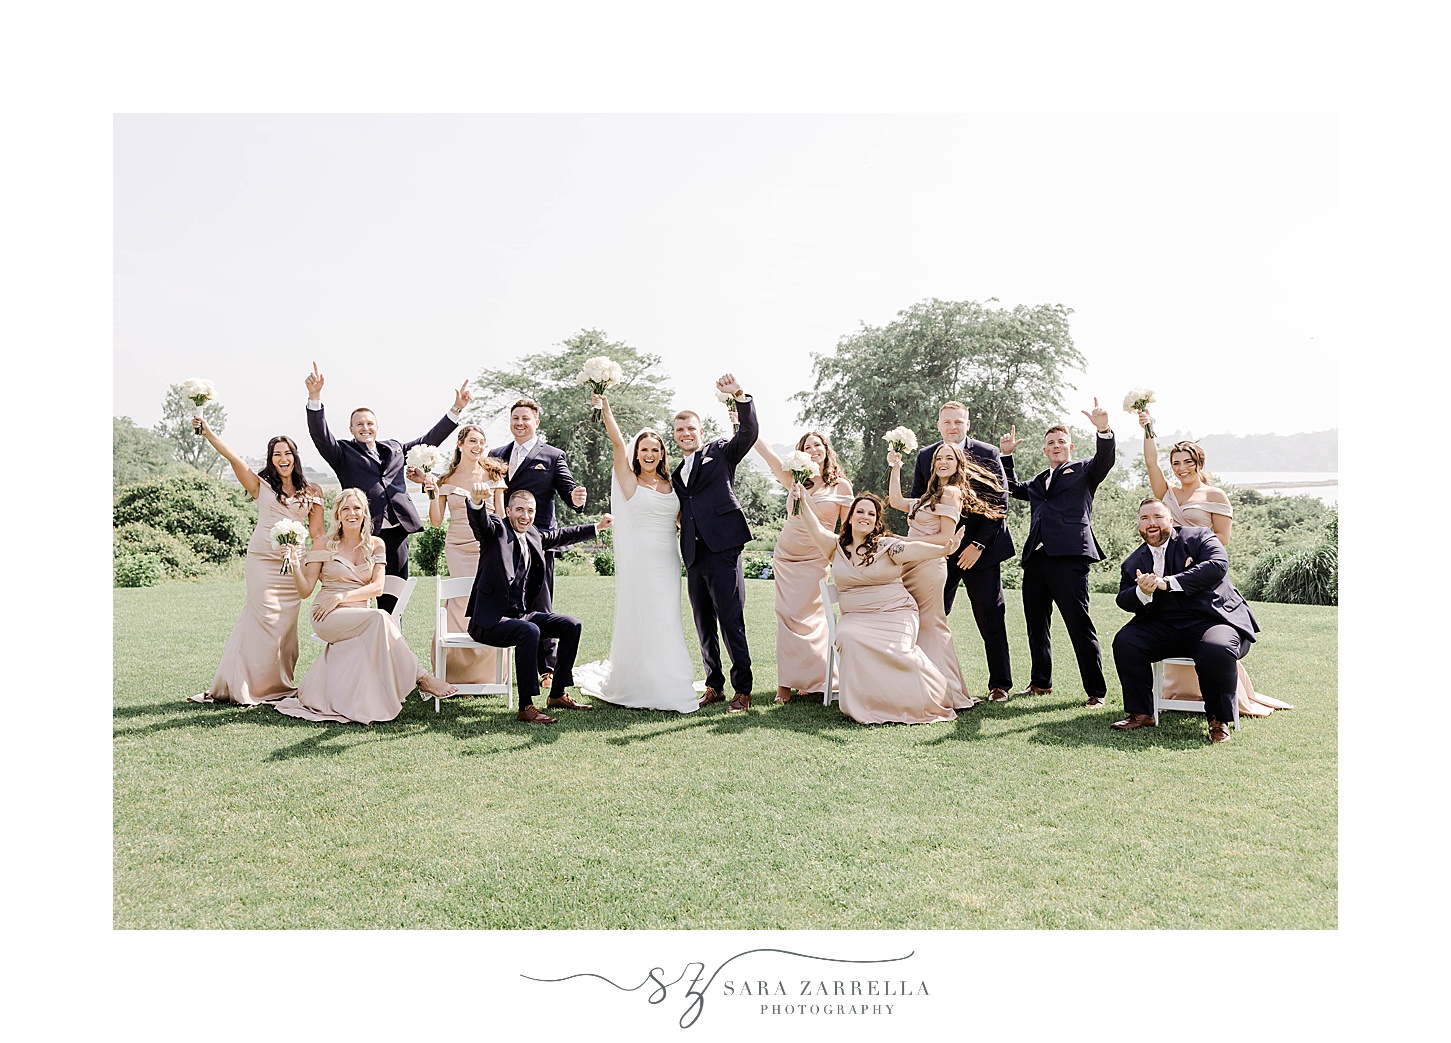 bride and groom cheer with wedding party in pink and navy attire 